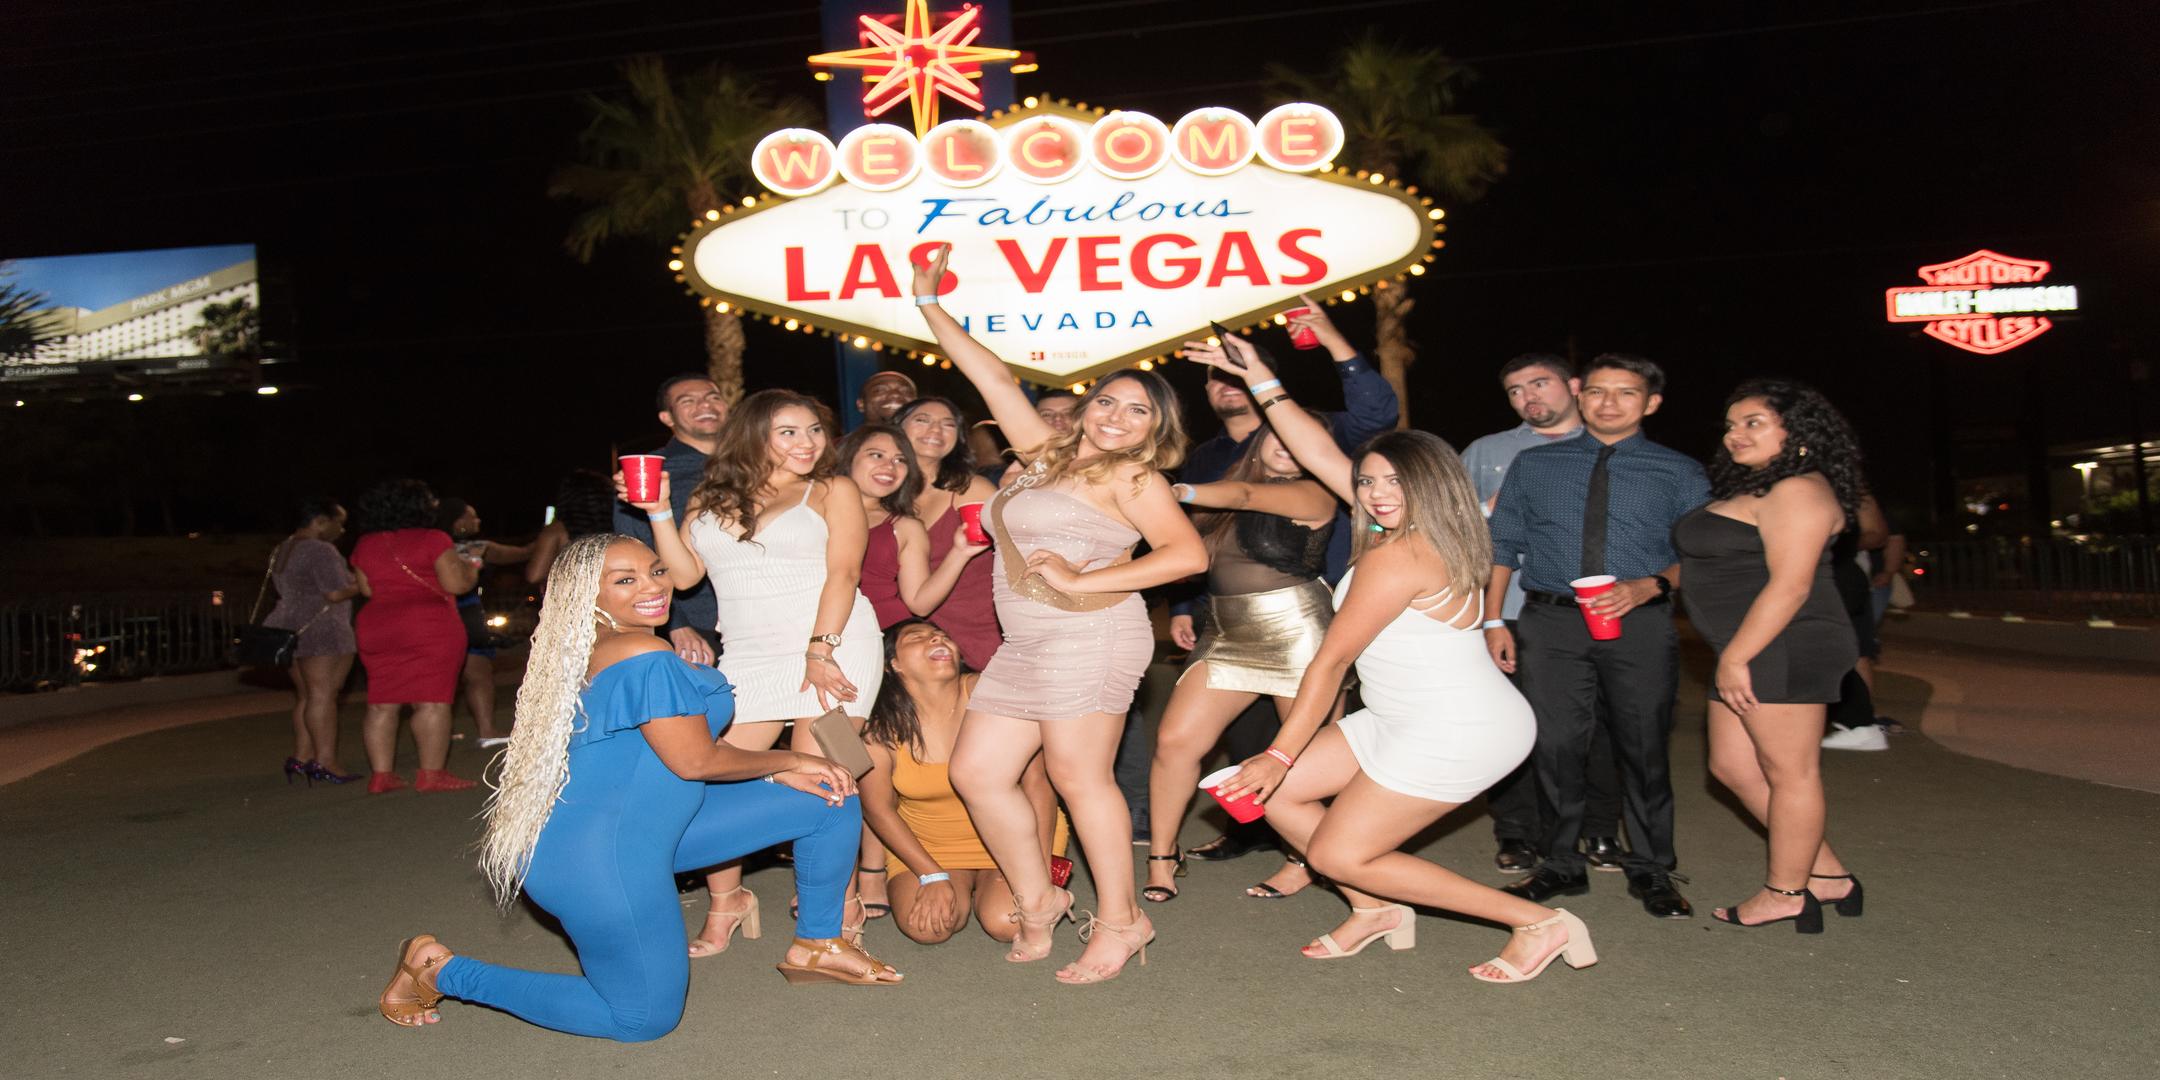 The Best Party Bus Club Crawl In Vegas (Saturday)